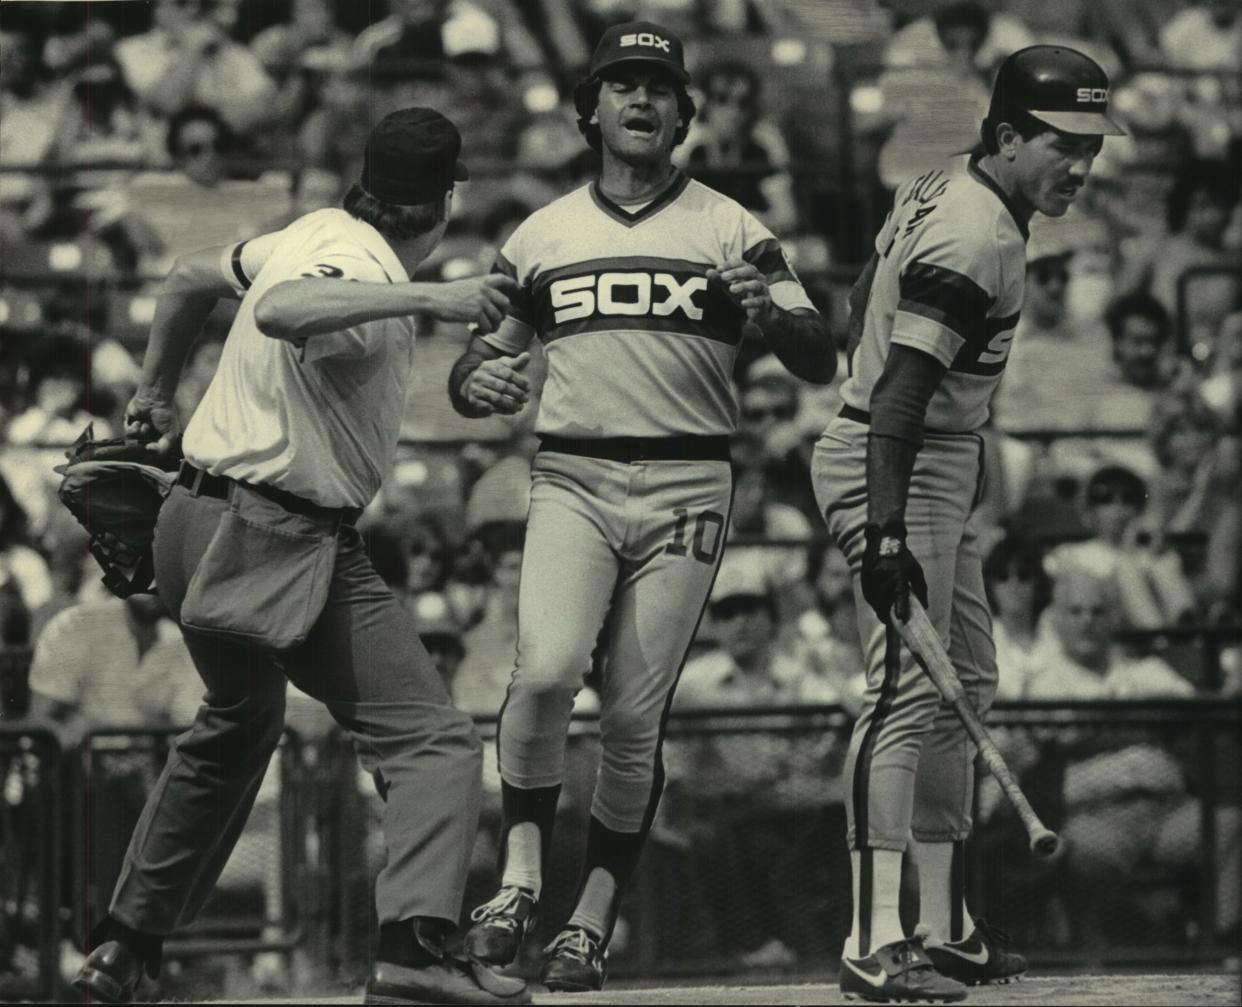 Manager Tony LaRussa was injured in a 1980 brawl between the Brewers and the White Sox.